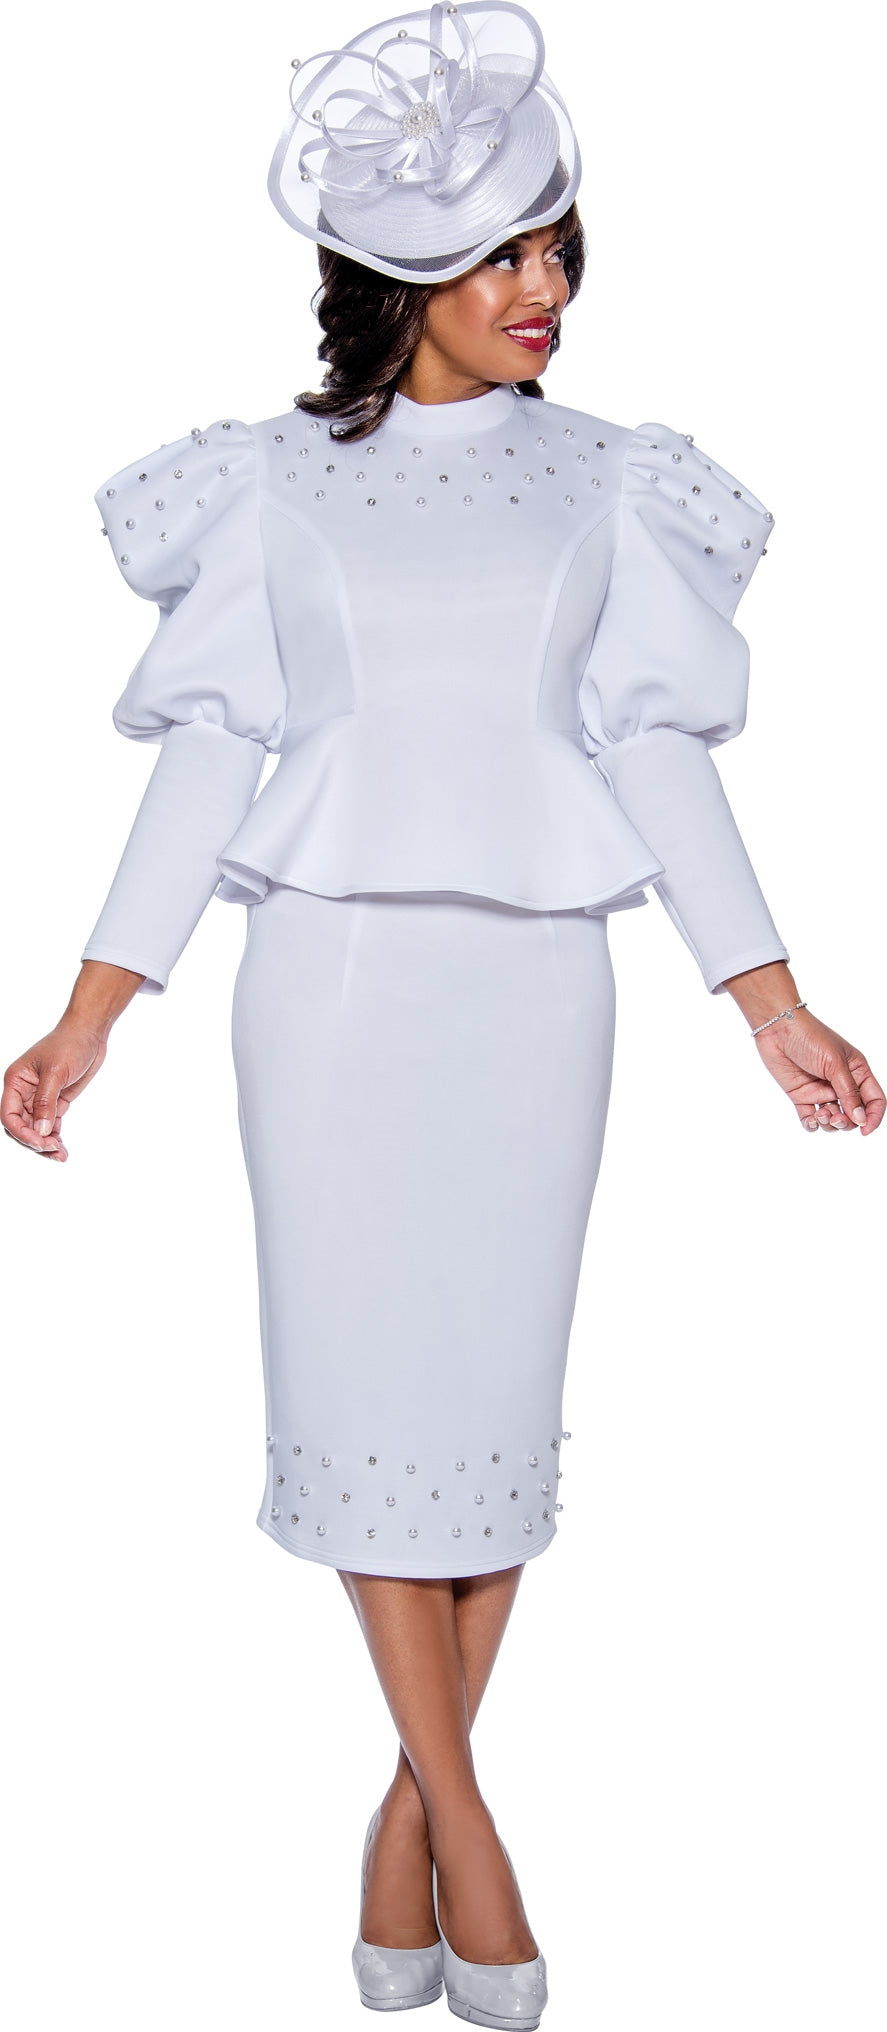 Stellar Looks Skirt Suit 1402C-White - Church Suits For Less